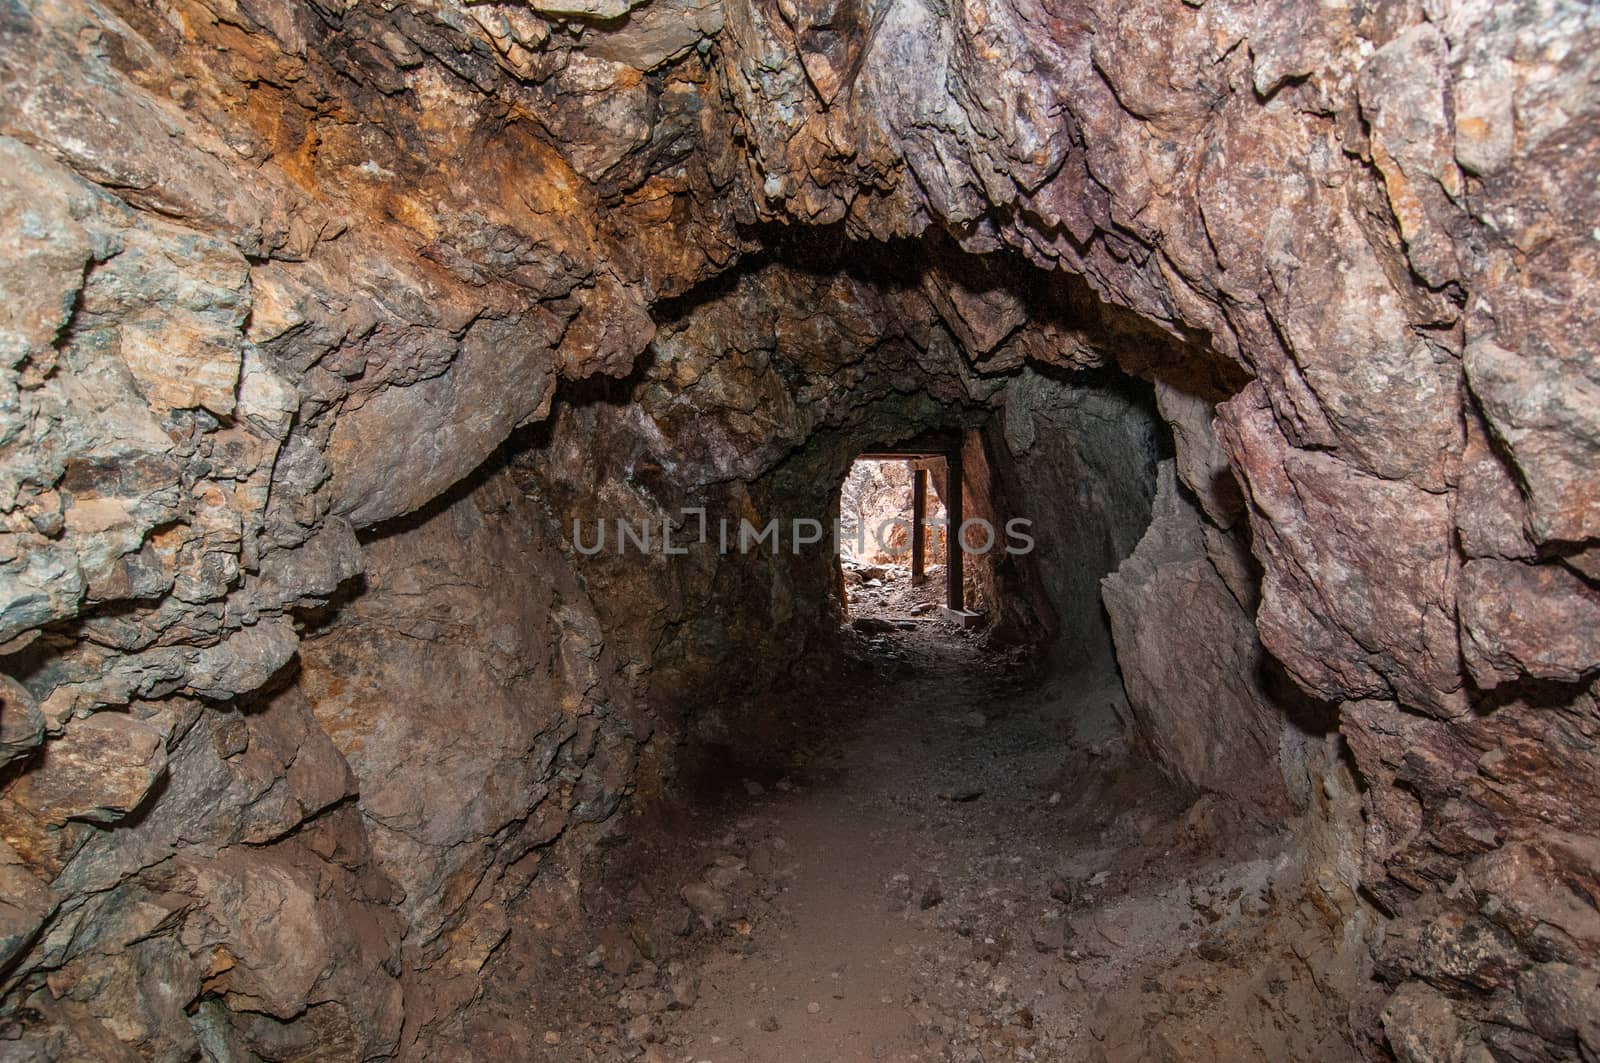 Abandoned mine entrance in Death Valley, California by Njean